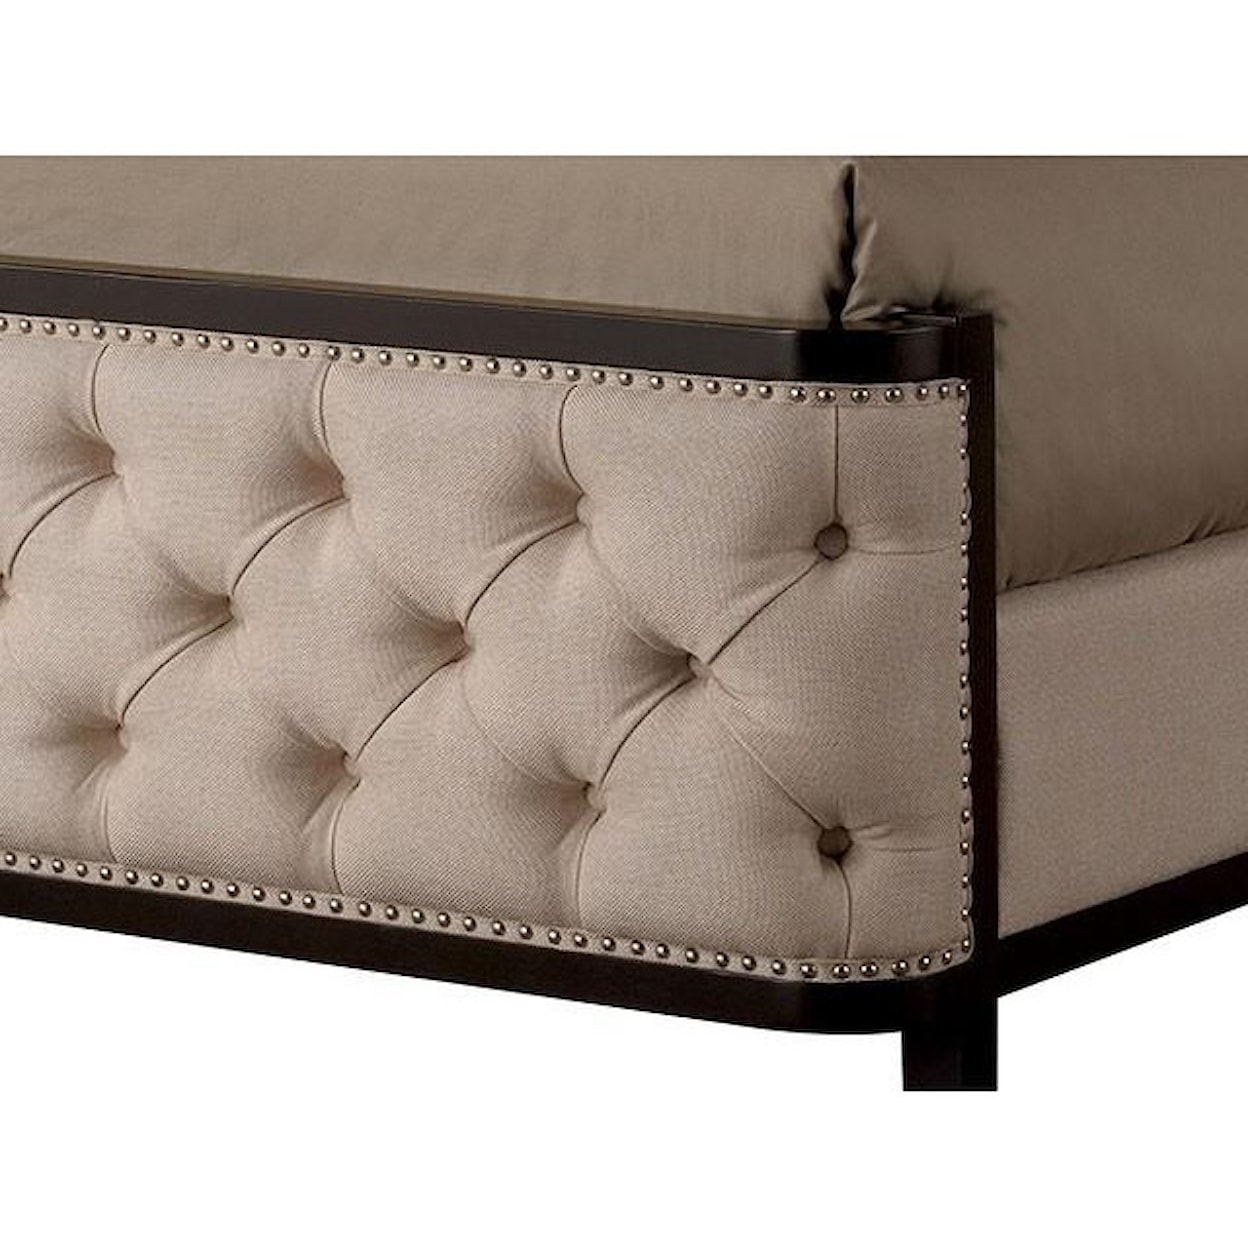 Furniture of America Chanelle Bed